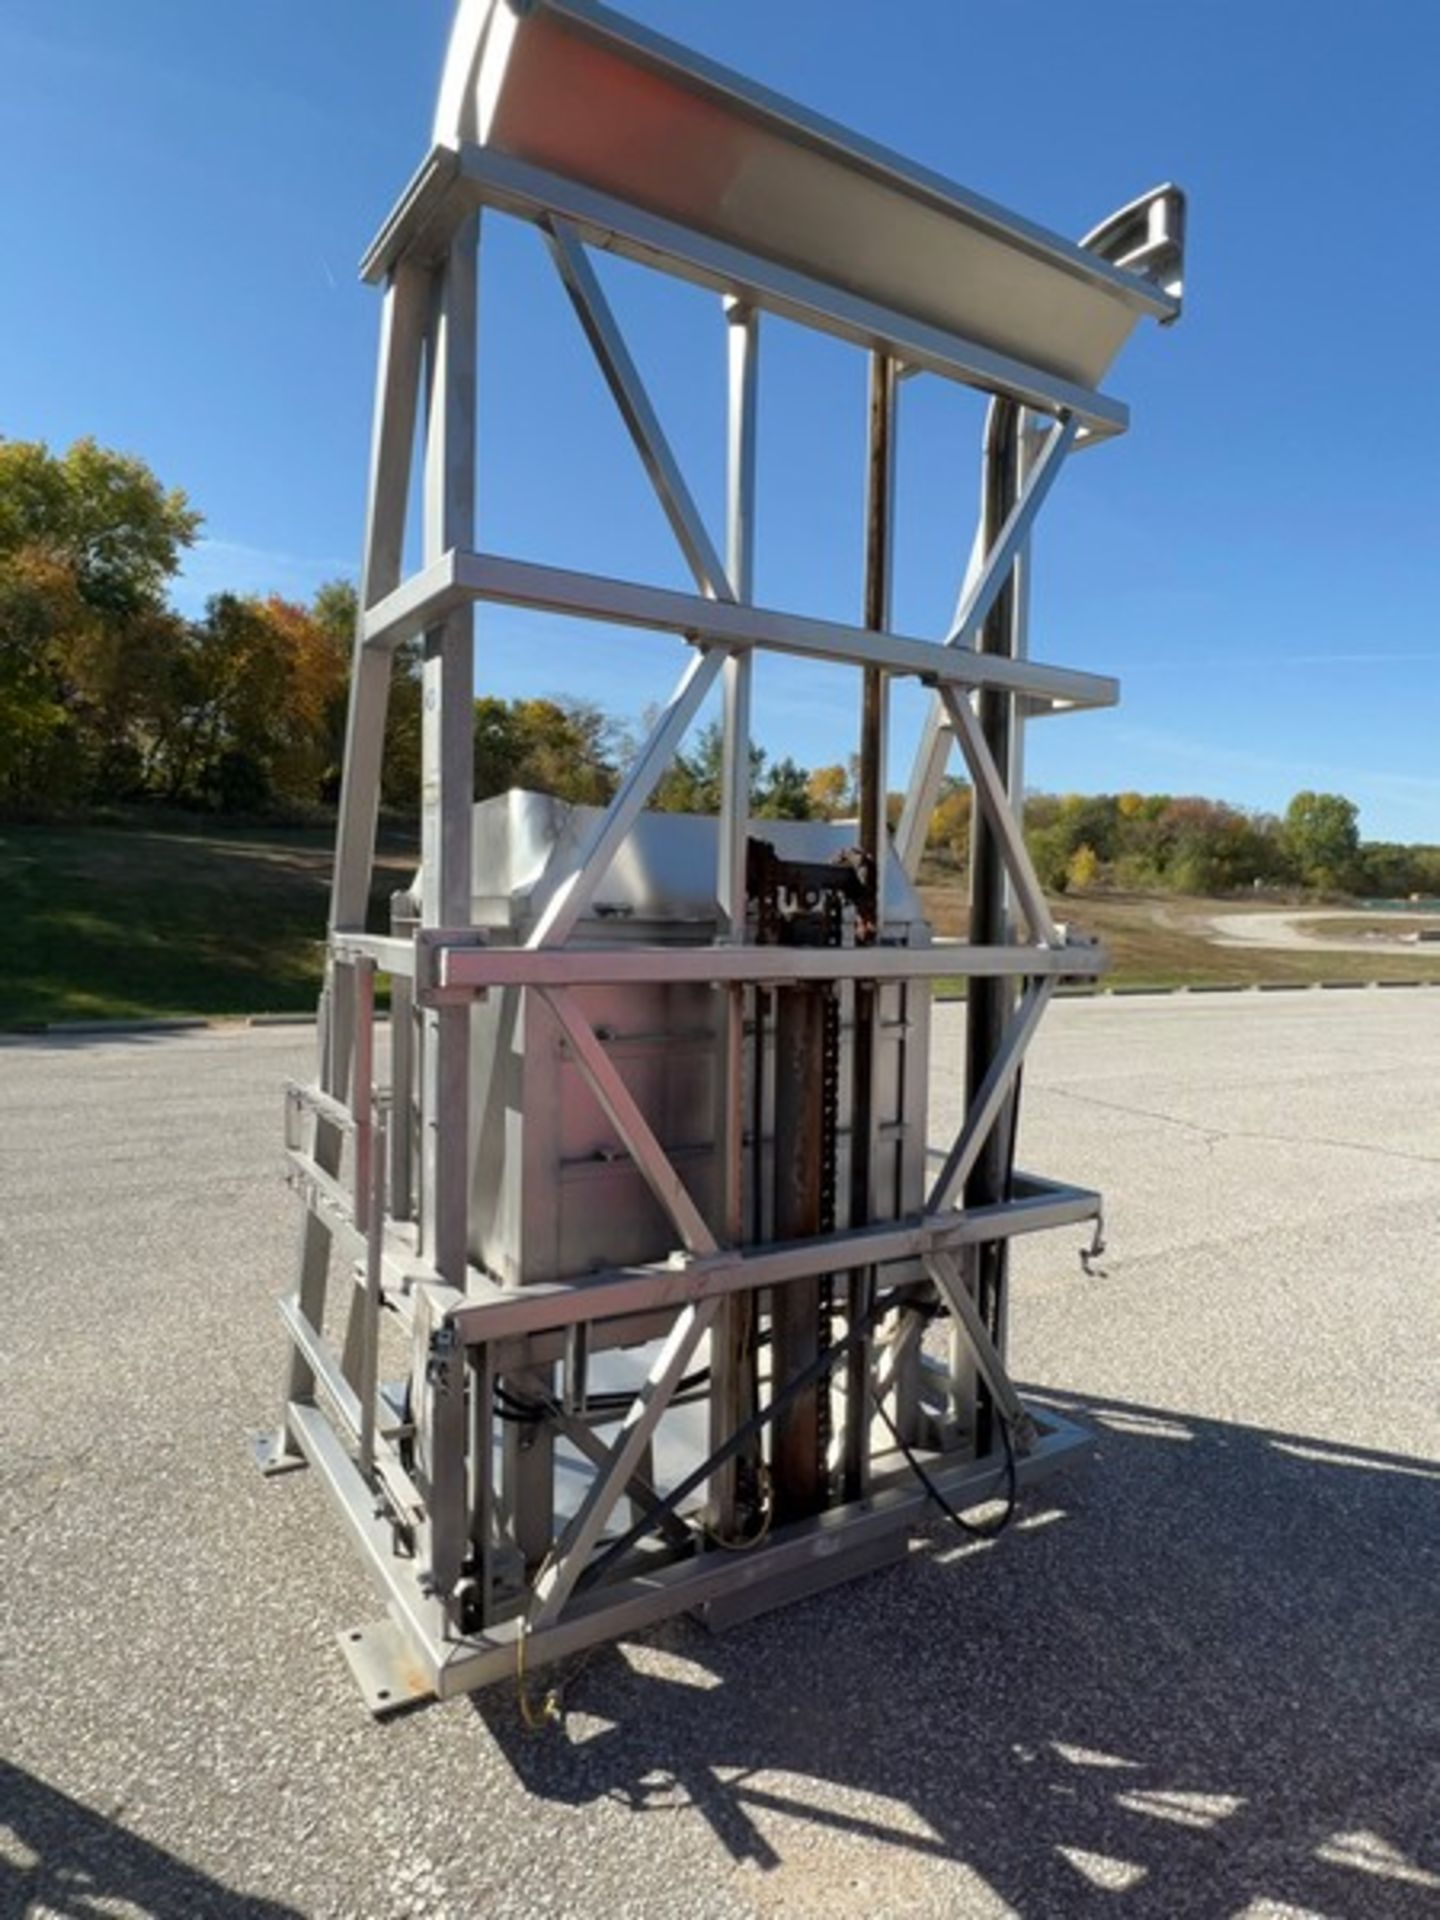 MTC 3,000 LB TOTE DUMP COLUMN, MODEL H-LEC, S/N 073599, APPROX. 132” DUMP HEIGHT, FOR APPROX . 52” L - Image 3 of 5